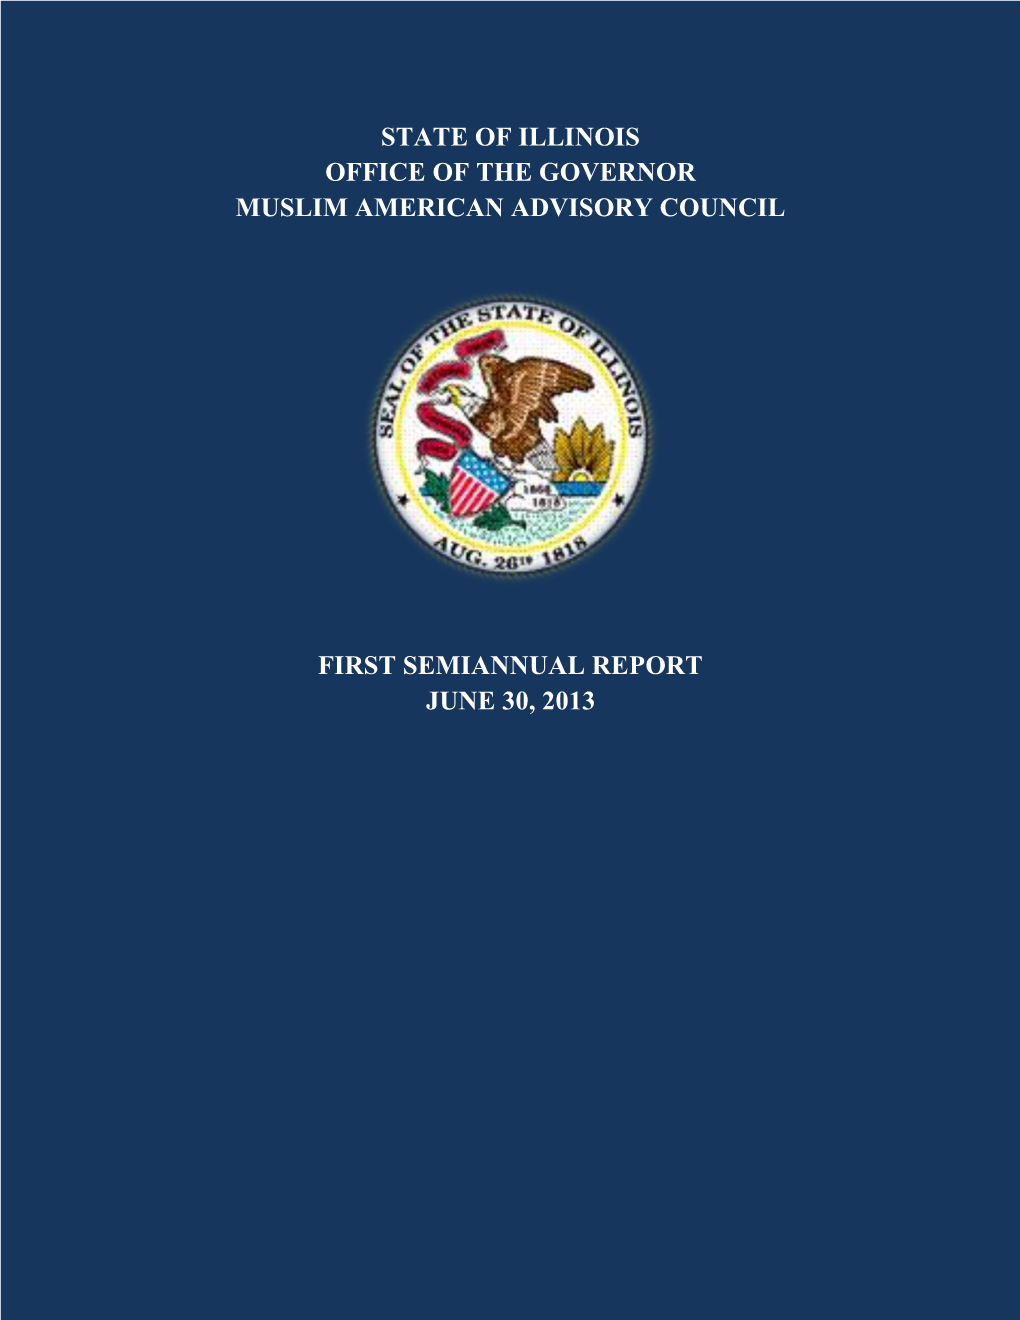 First Semiannual Report June 30, 2013